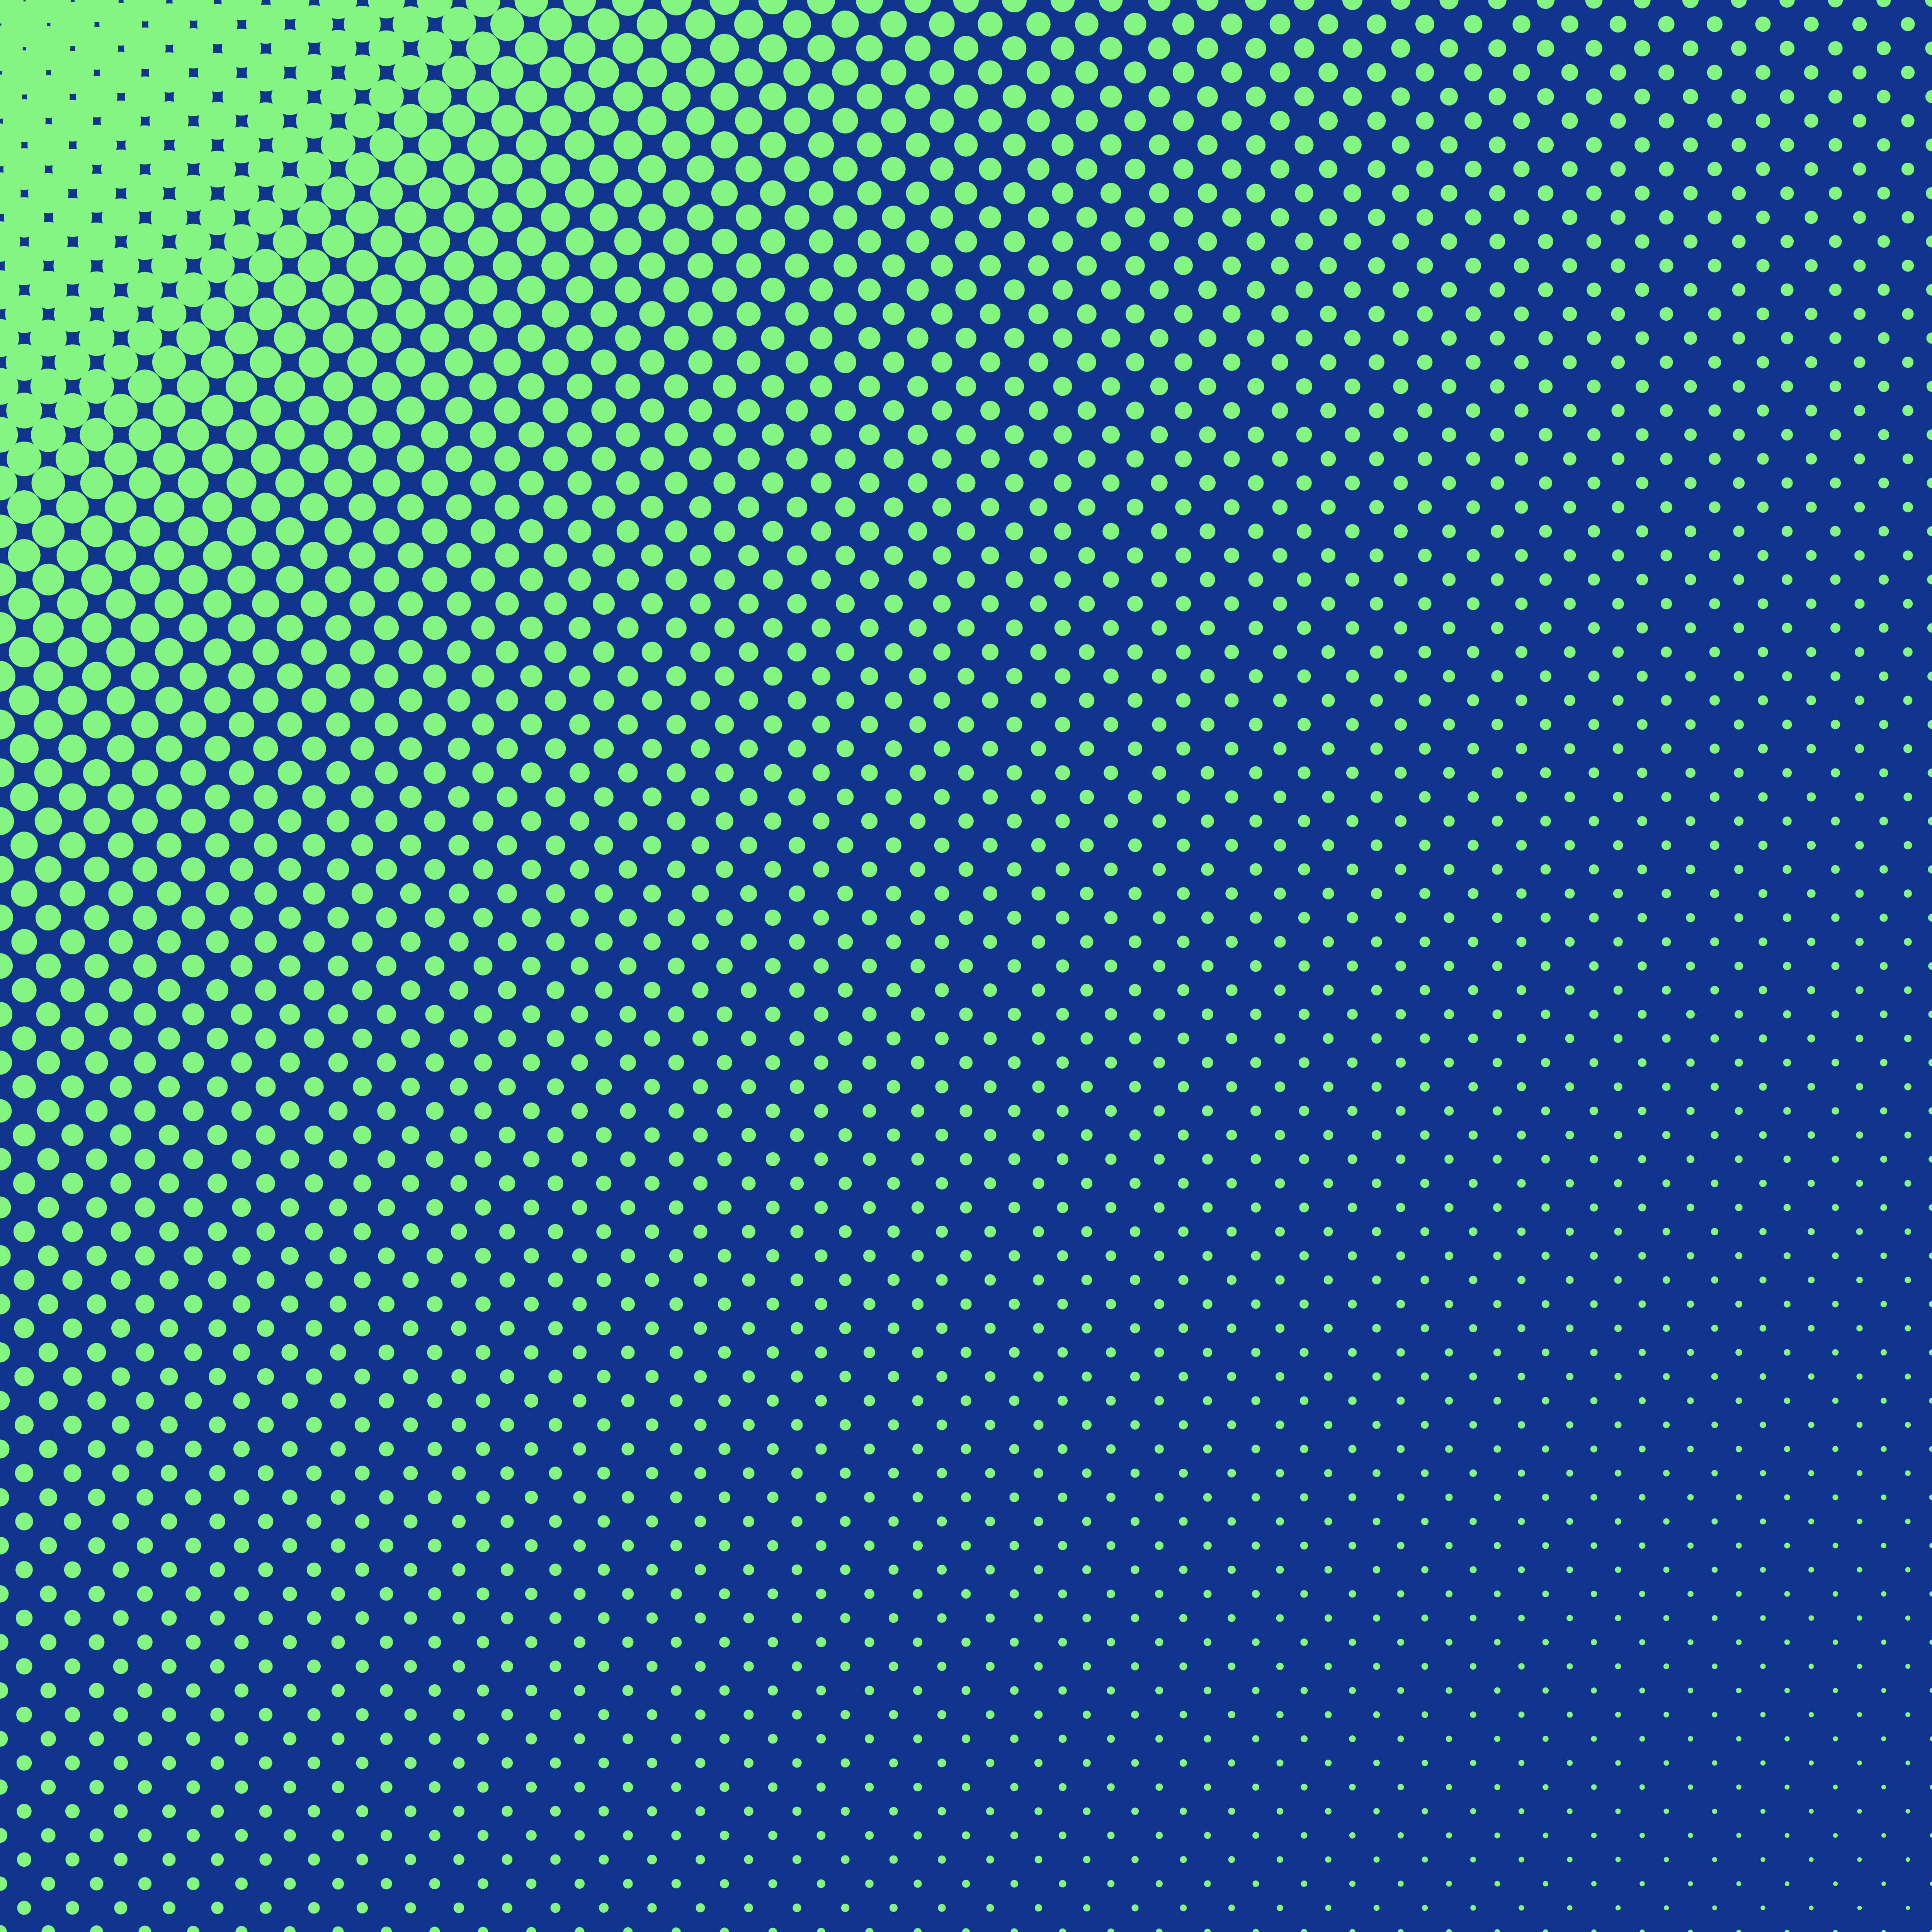 texture, green, blue, circles, textures, points, point, gradient lock screen backgrounds